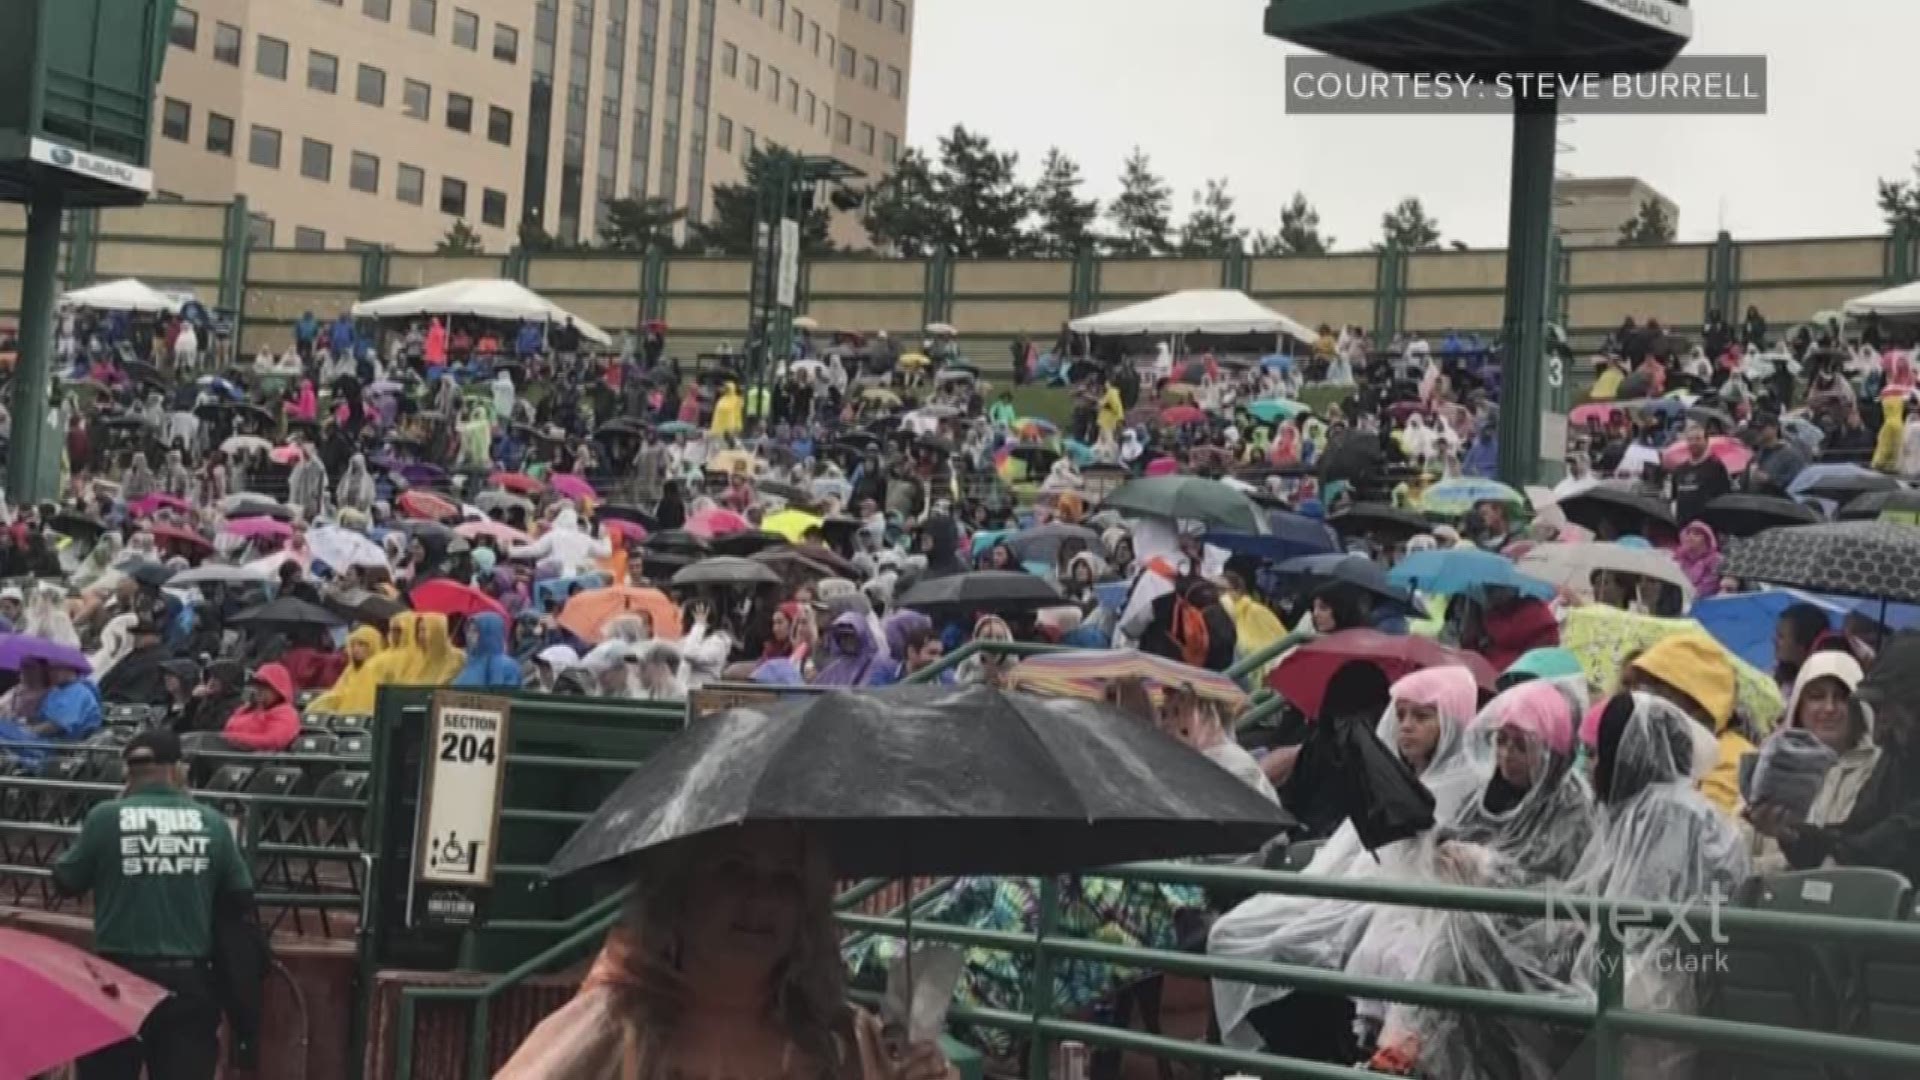 Red Rocks told us "the easy answer is that 9,000 umbrellas in the venue causes a lot of headache for people trying to see around them."